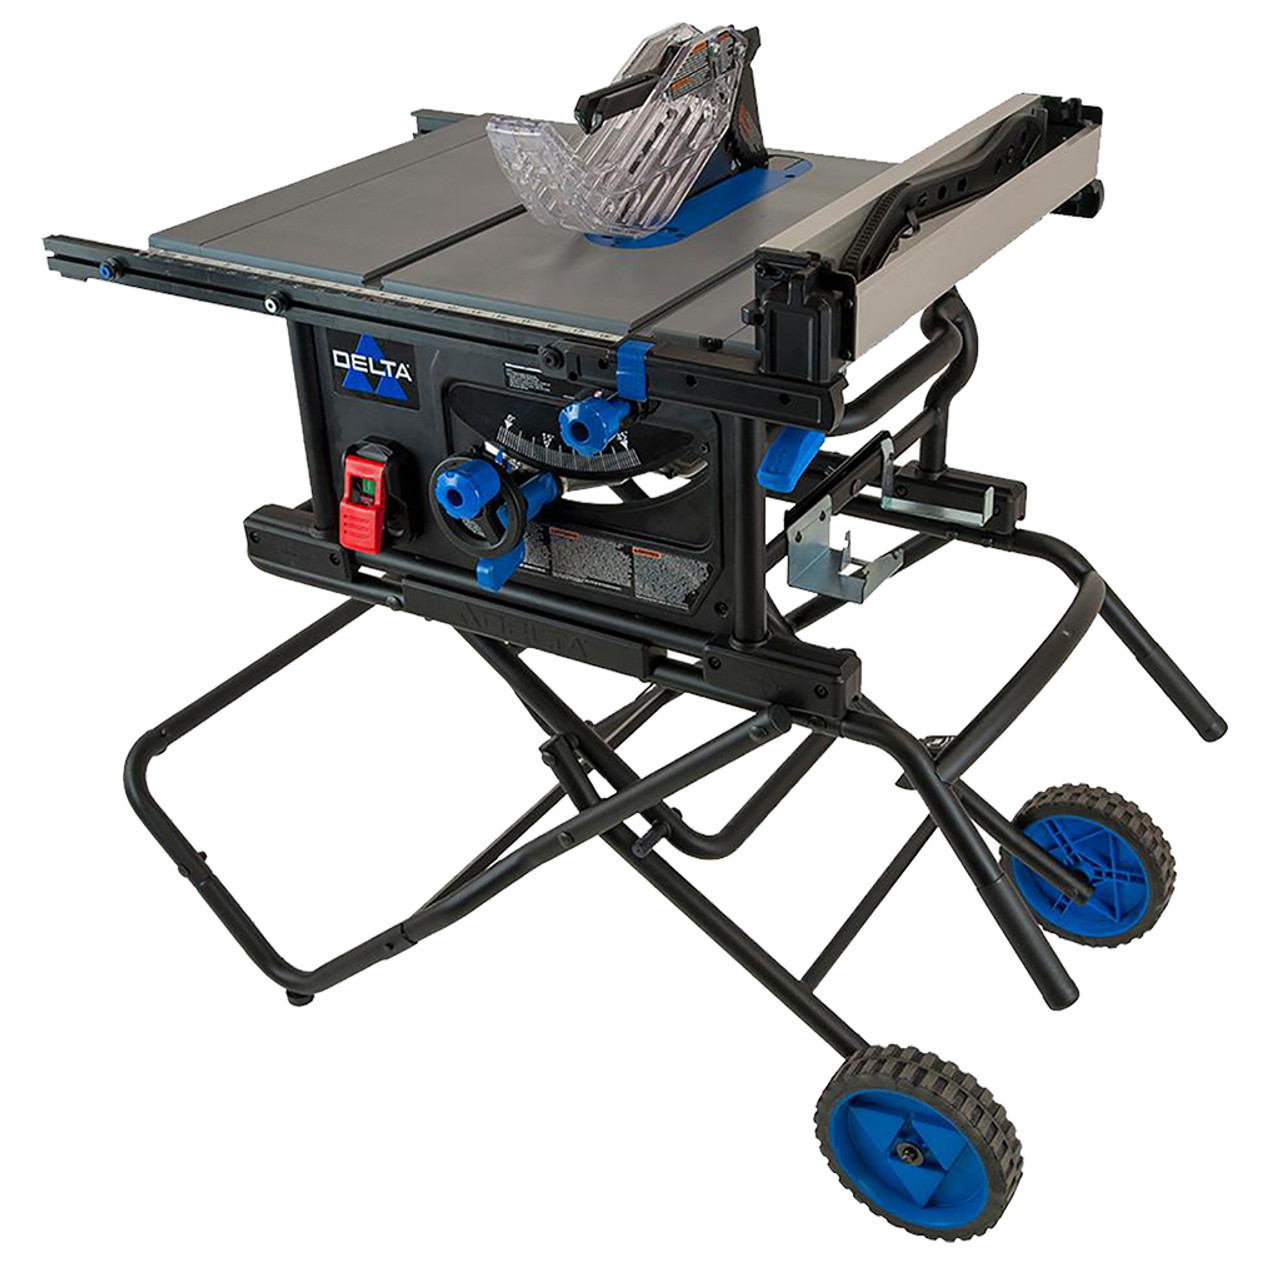 Delta 10 Portable Table Saw Midwest Technology Products